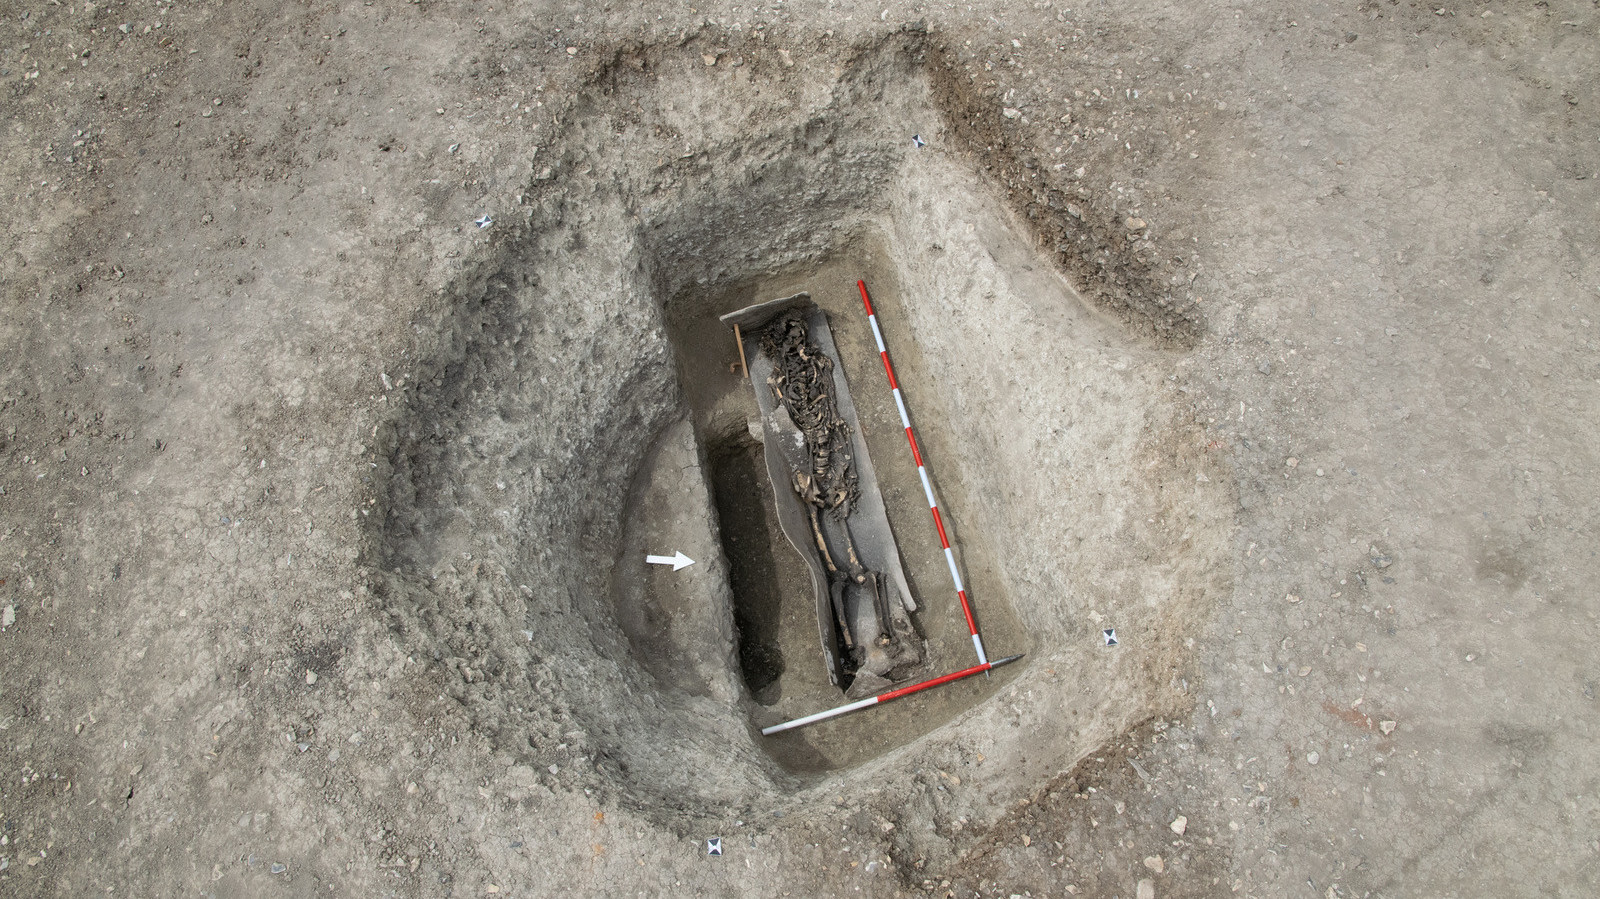 A high-status burial in a lead-lined coffin. (Image: HS2)